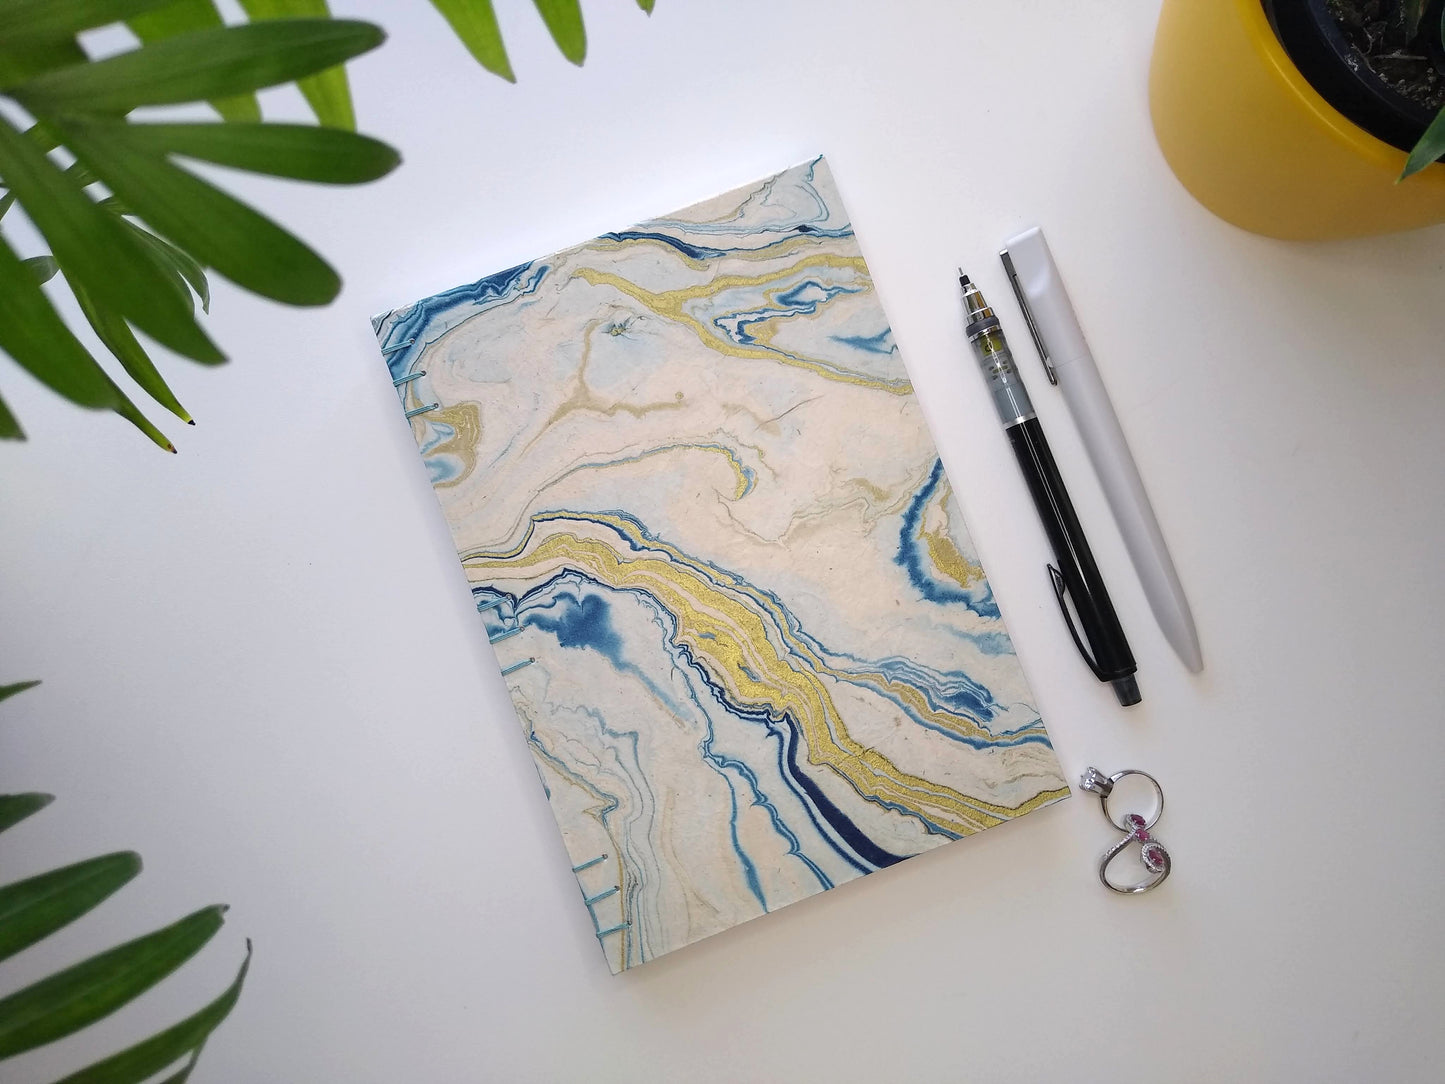 A handmade journal laying on a white desk beside two potted plants, a pair of rings, a grey pen, and a black mechanical pencil. The cover of the journal is cream paper, marbled with blue and gold.